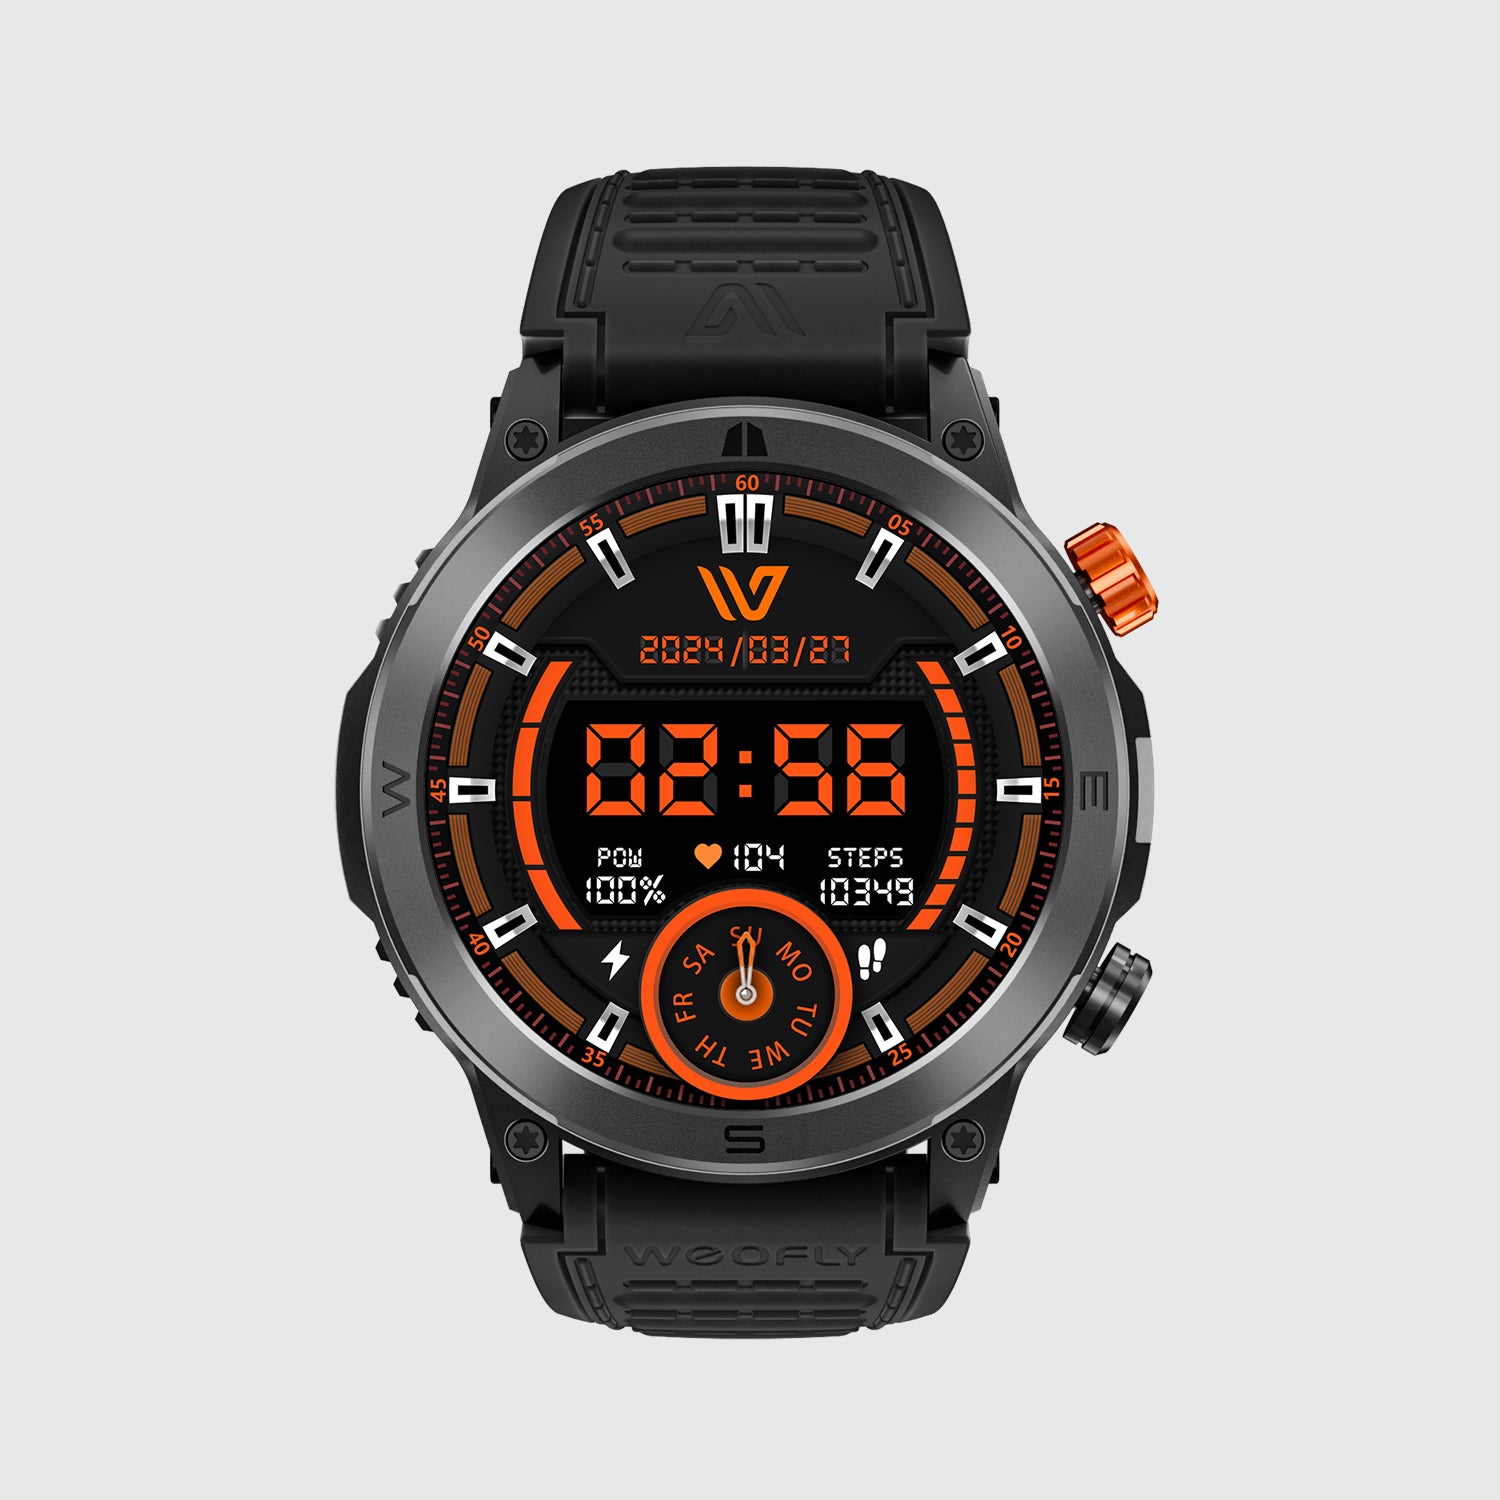 Weofly Conquer Smartwatch